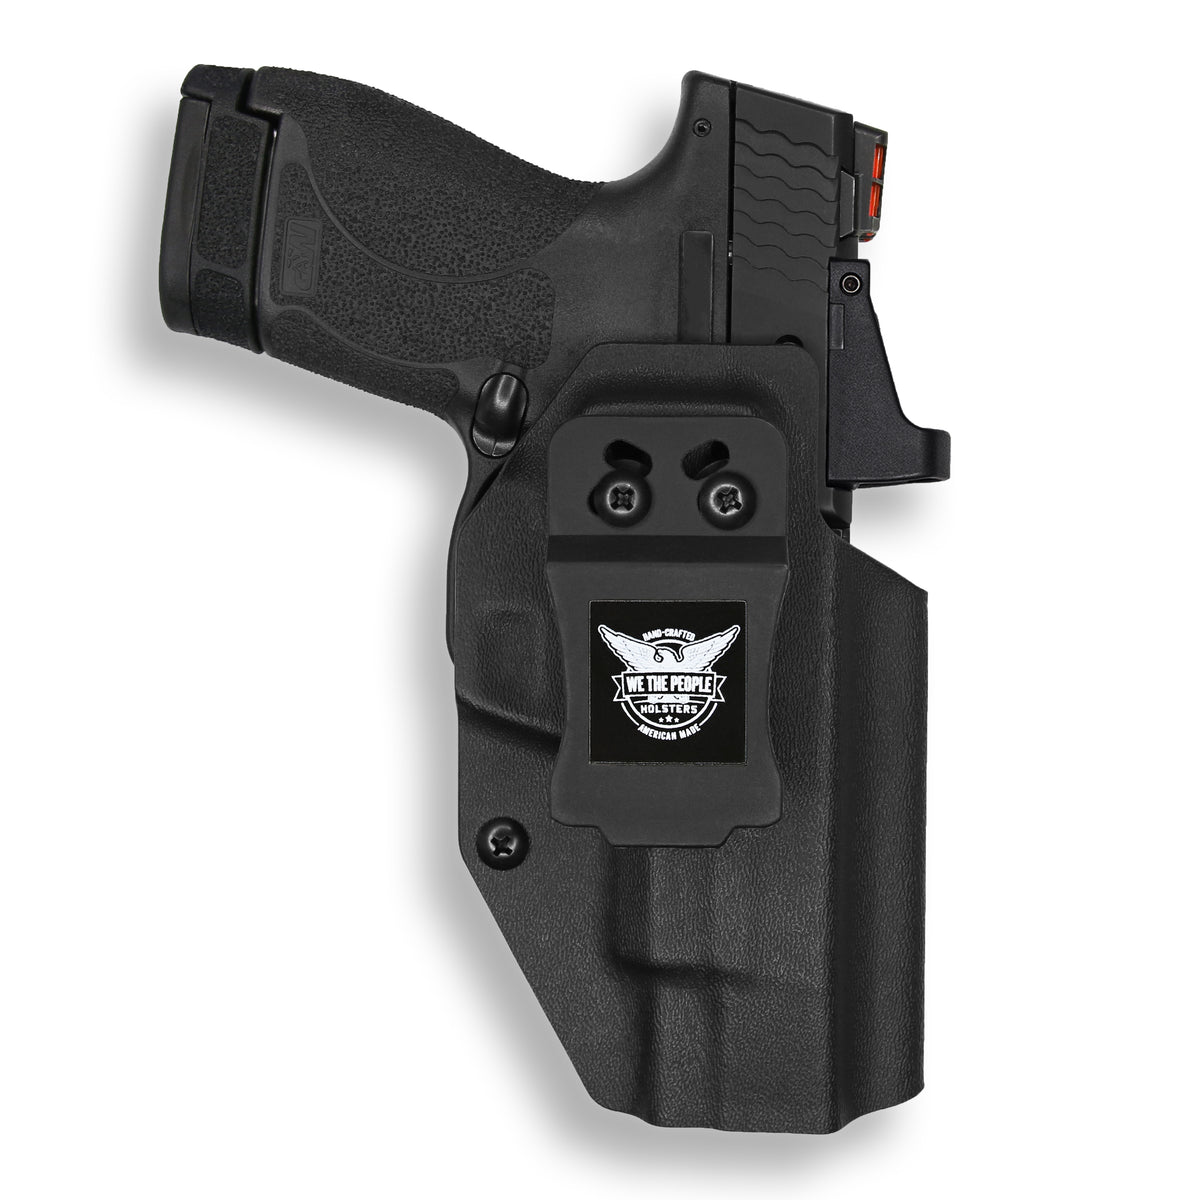 Smith & Wesson S&W M&P Shield 9mm 40 & Shield M2.0 IWB Concealed Gun Holster 